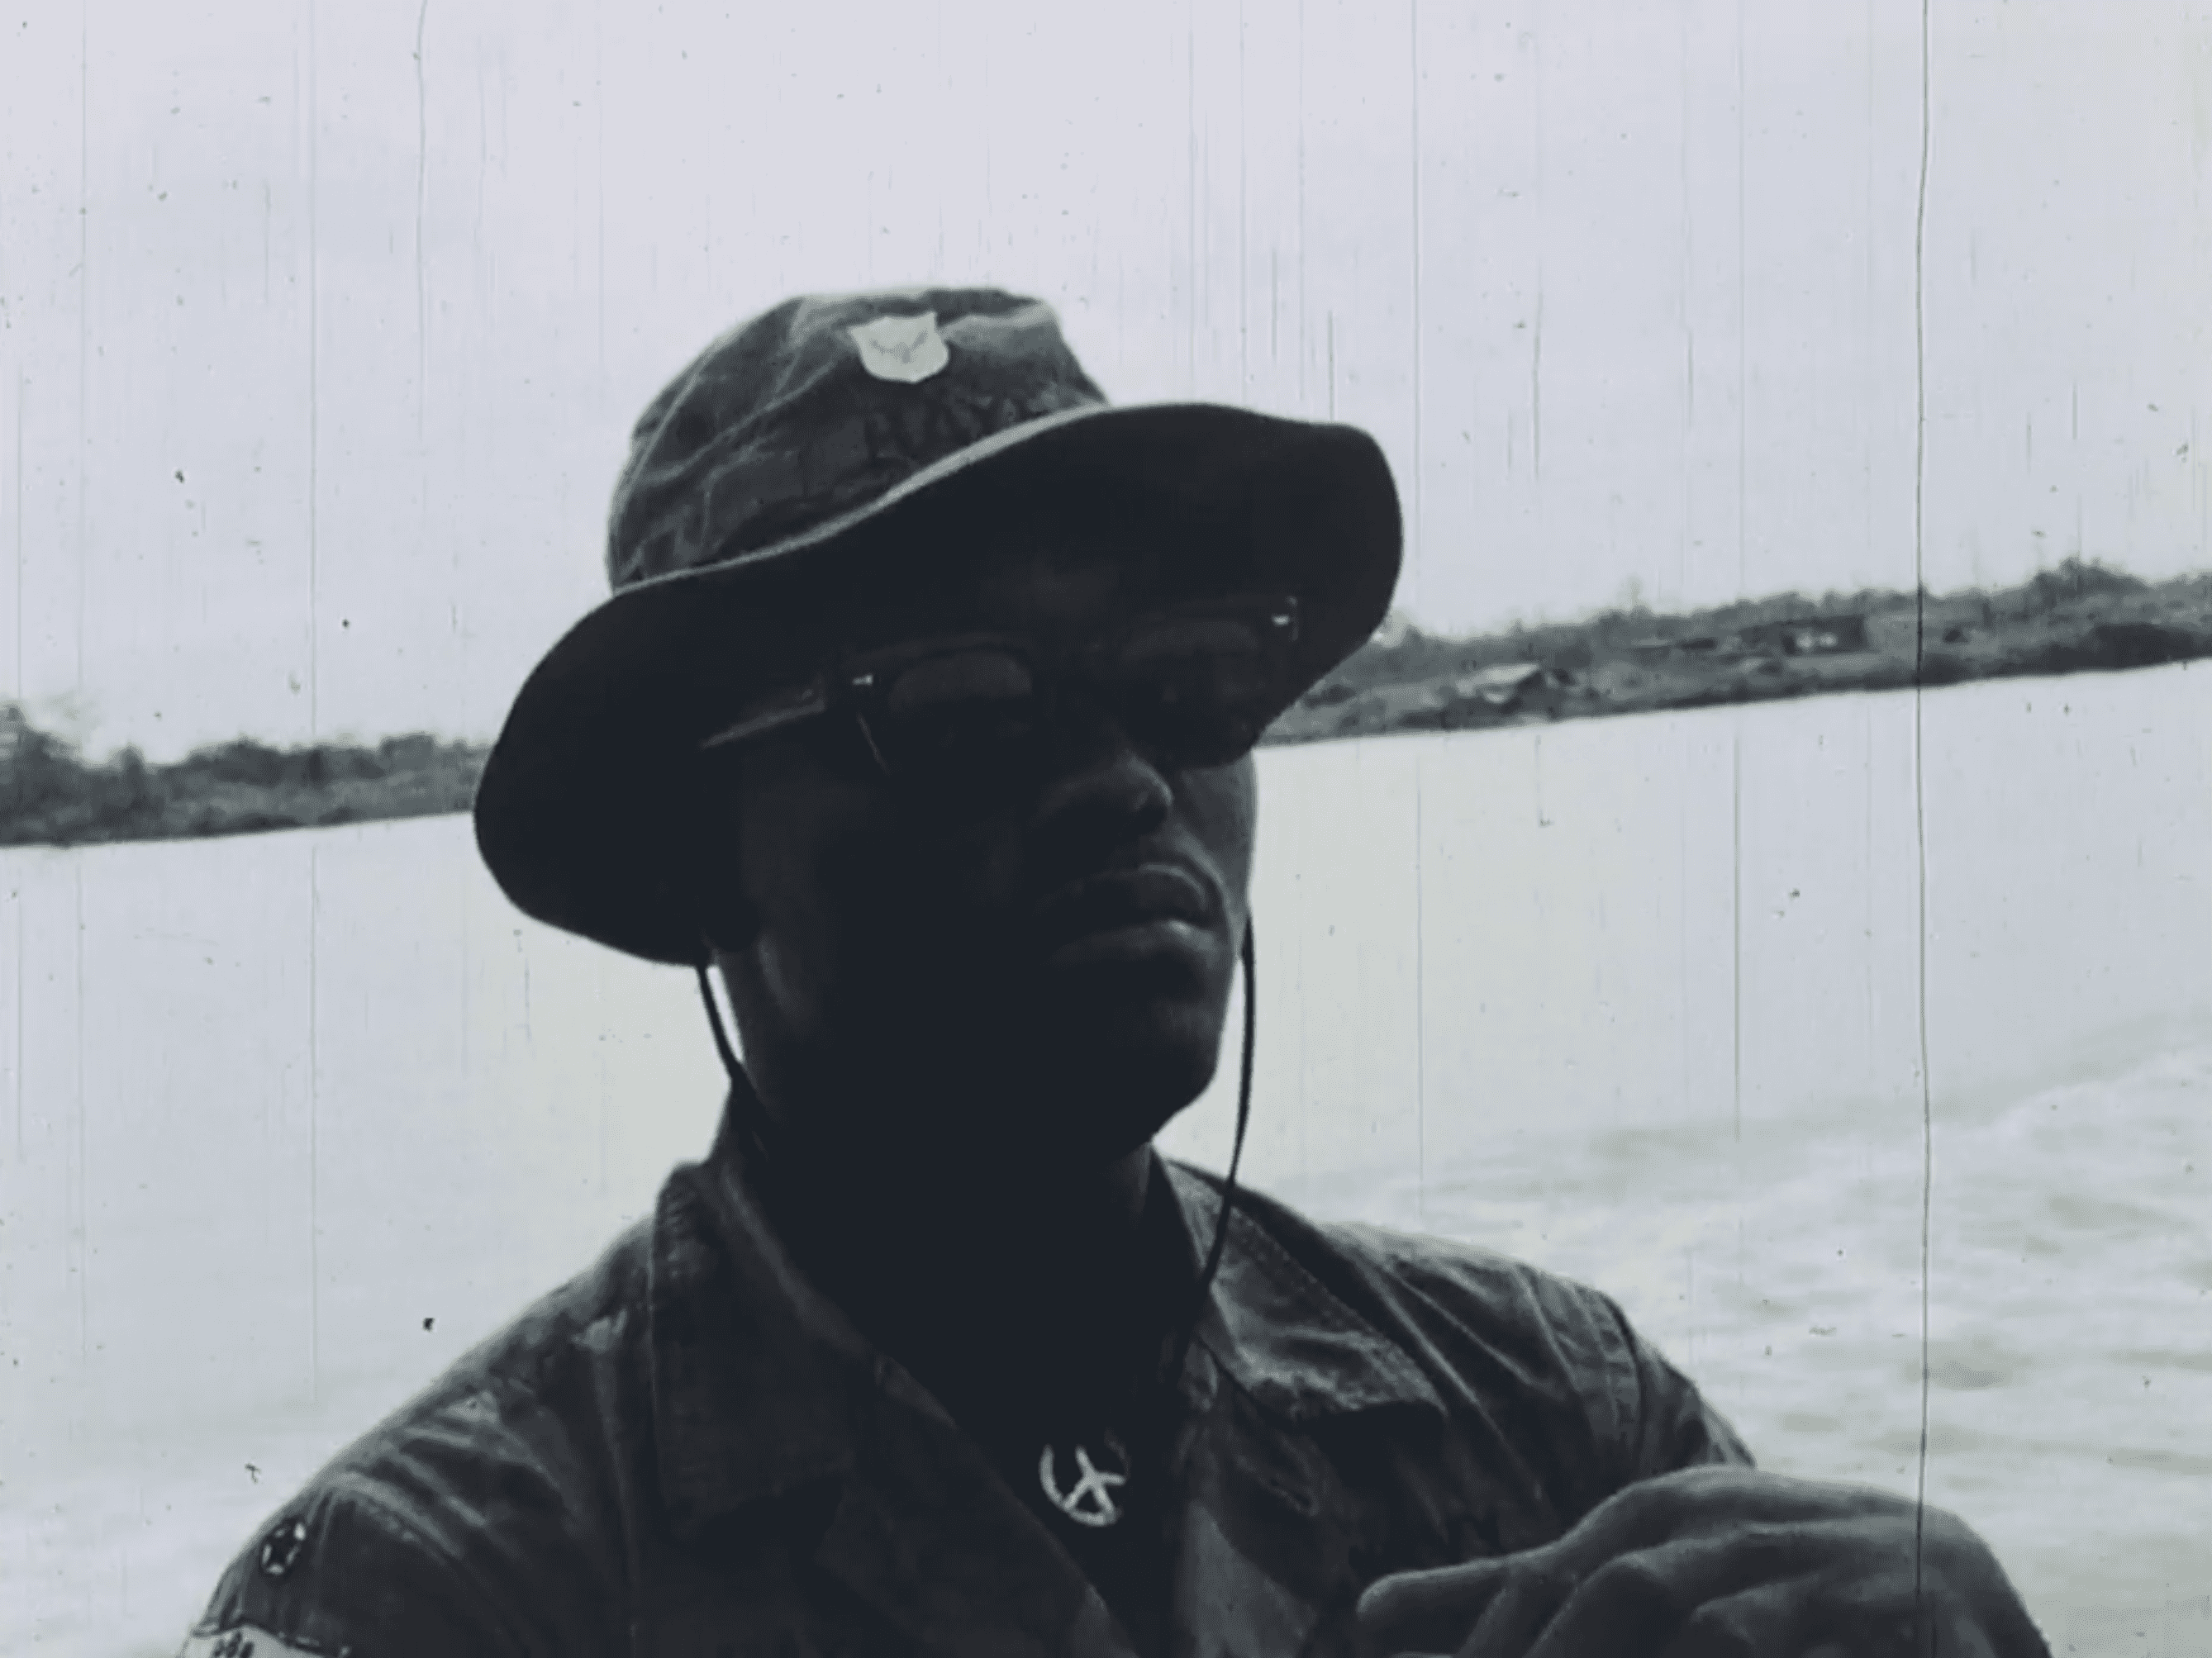 A soldier is on a boat in a bucket hat looking off over the water.